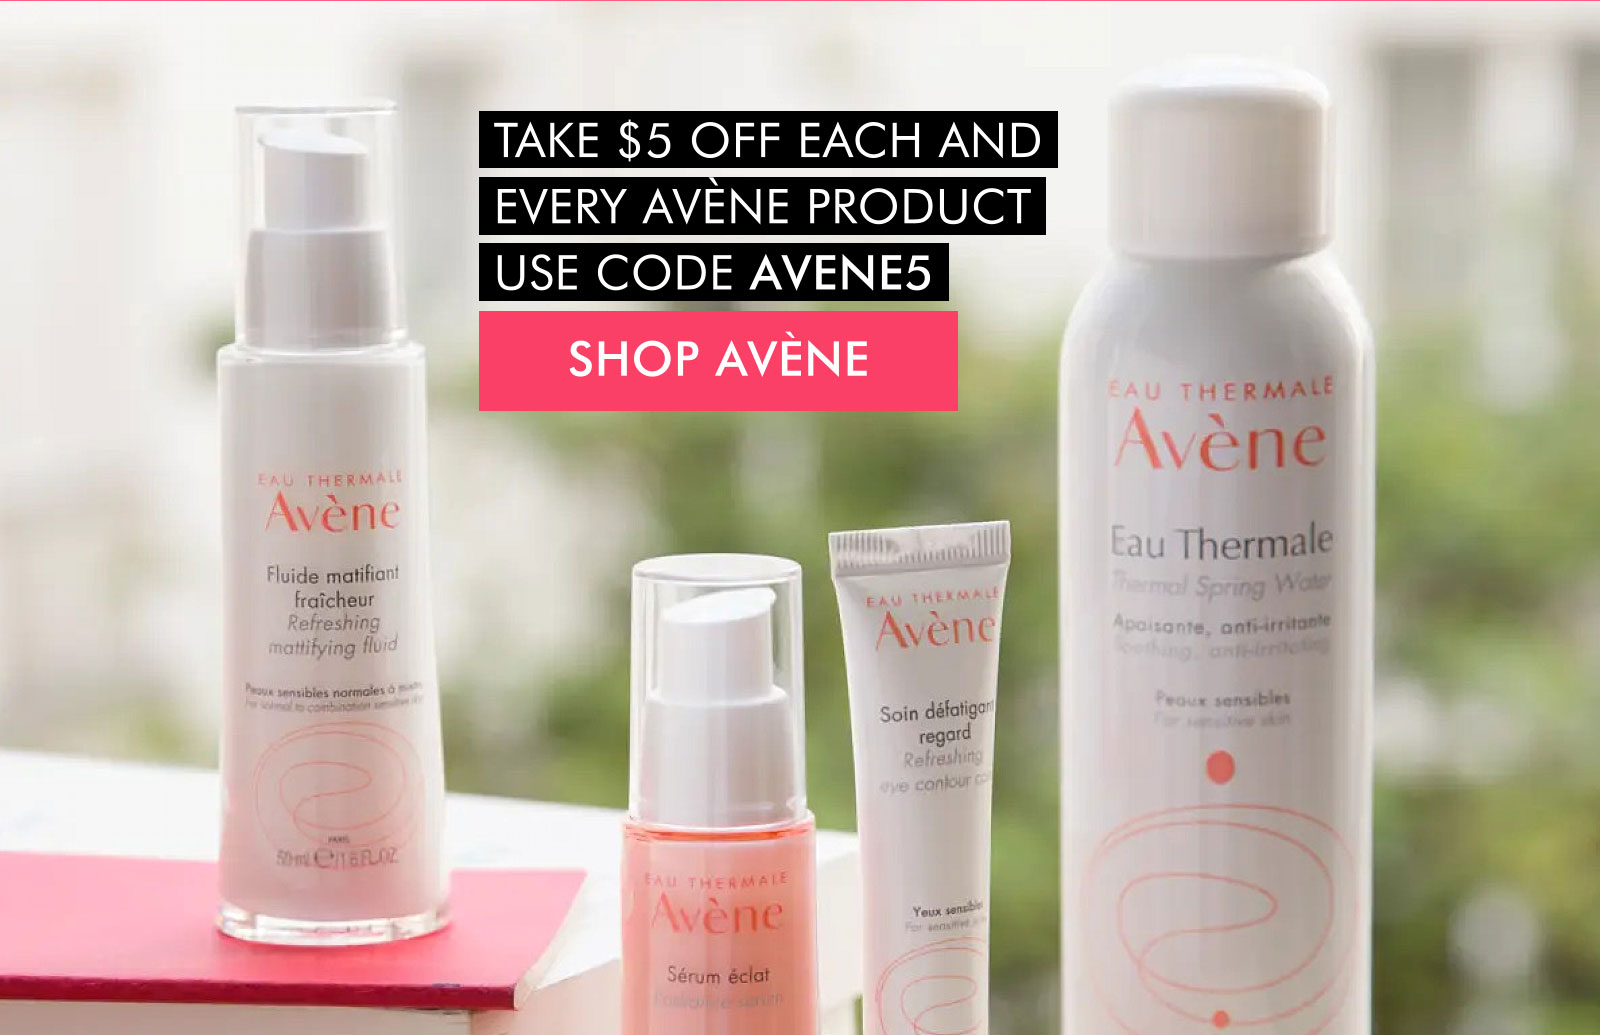 Instant $5 rebate on all Avène products with code AVENE5